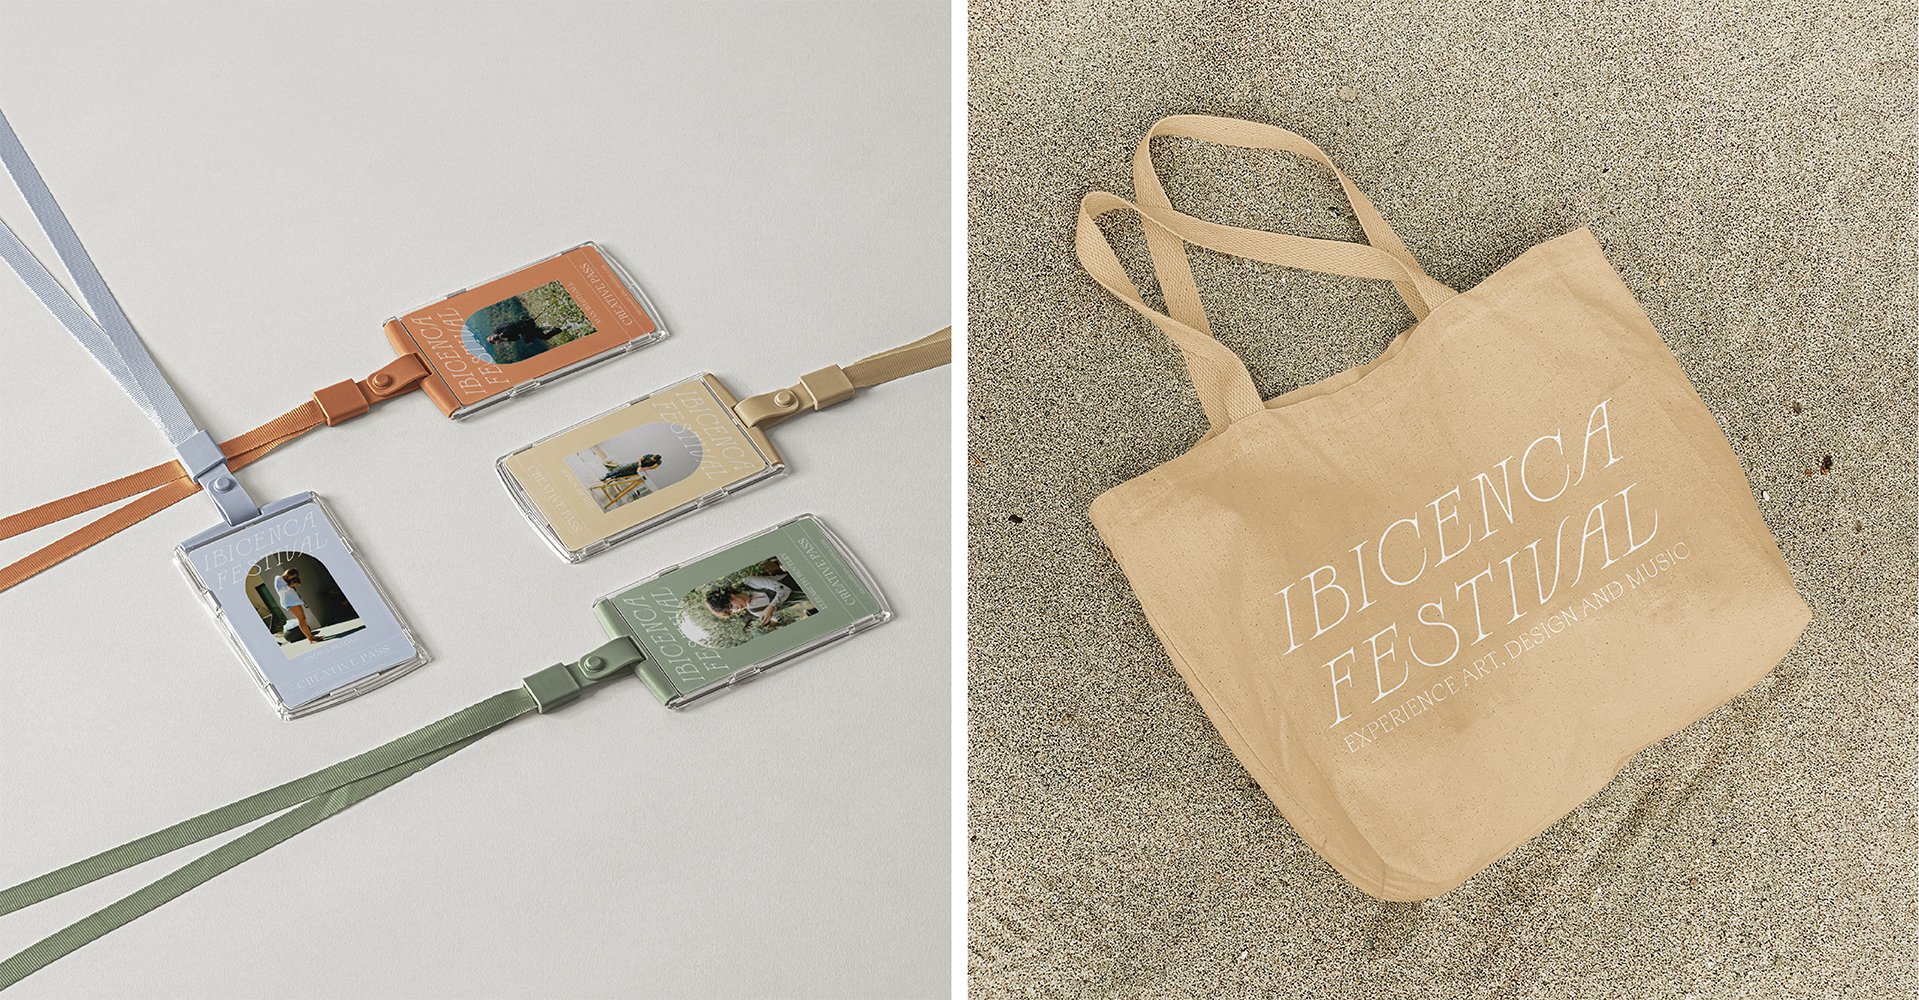 Ibicenca Festival / Merchandise / Lanyards and Tote bag